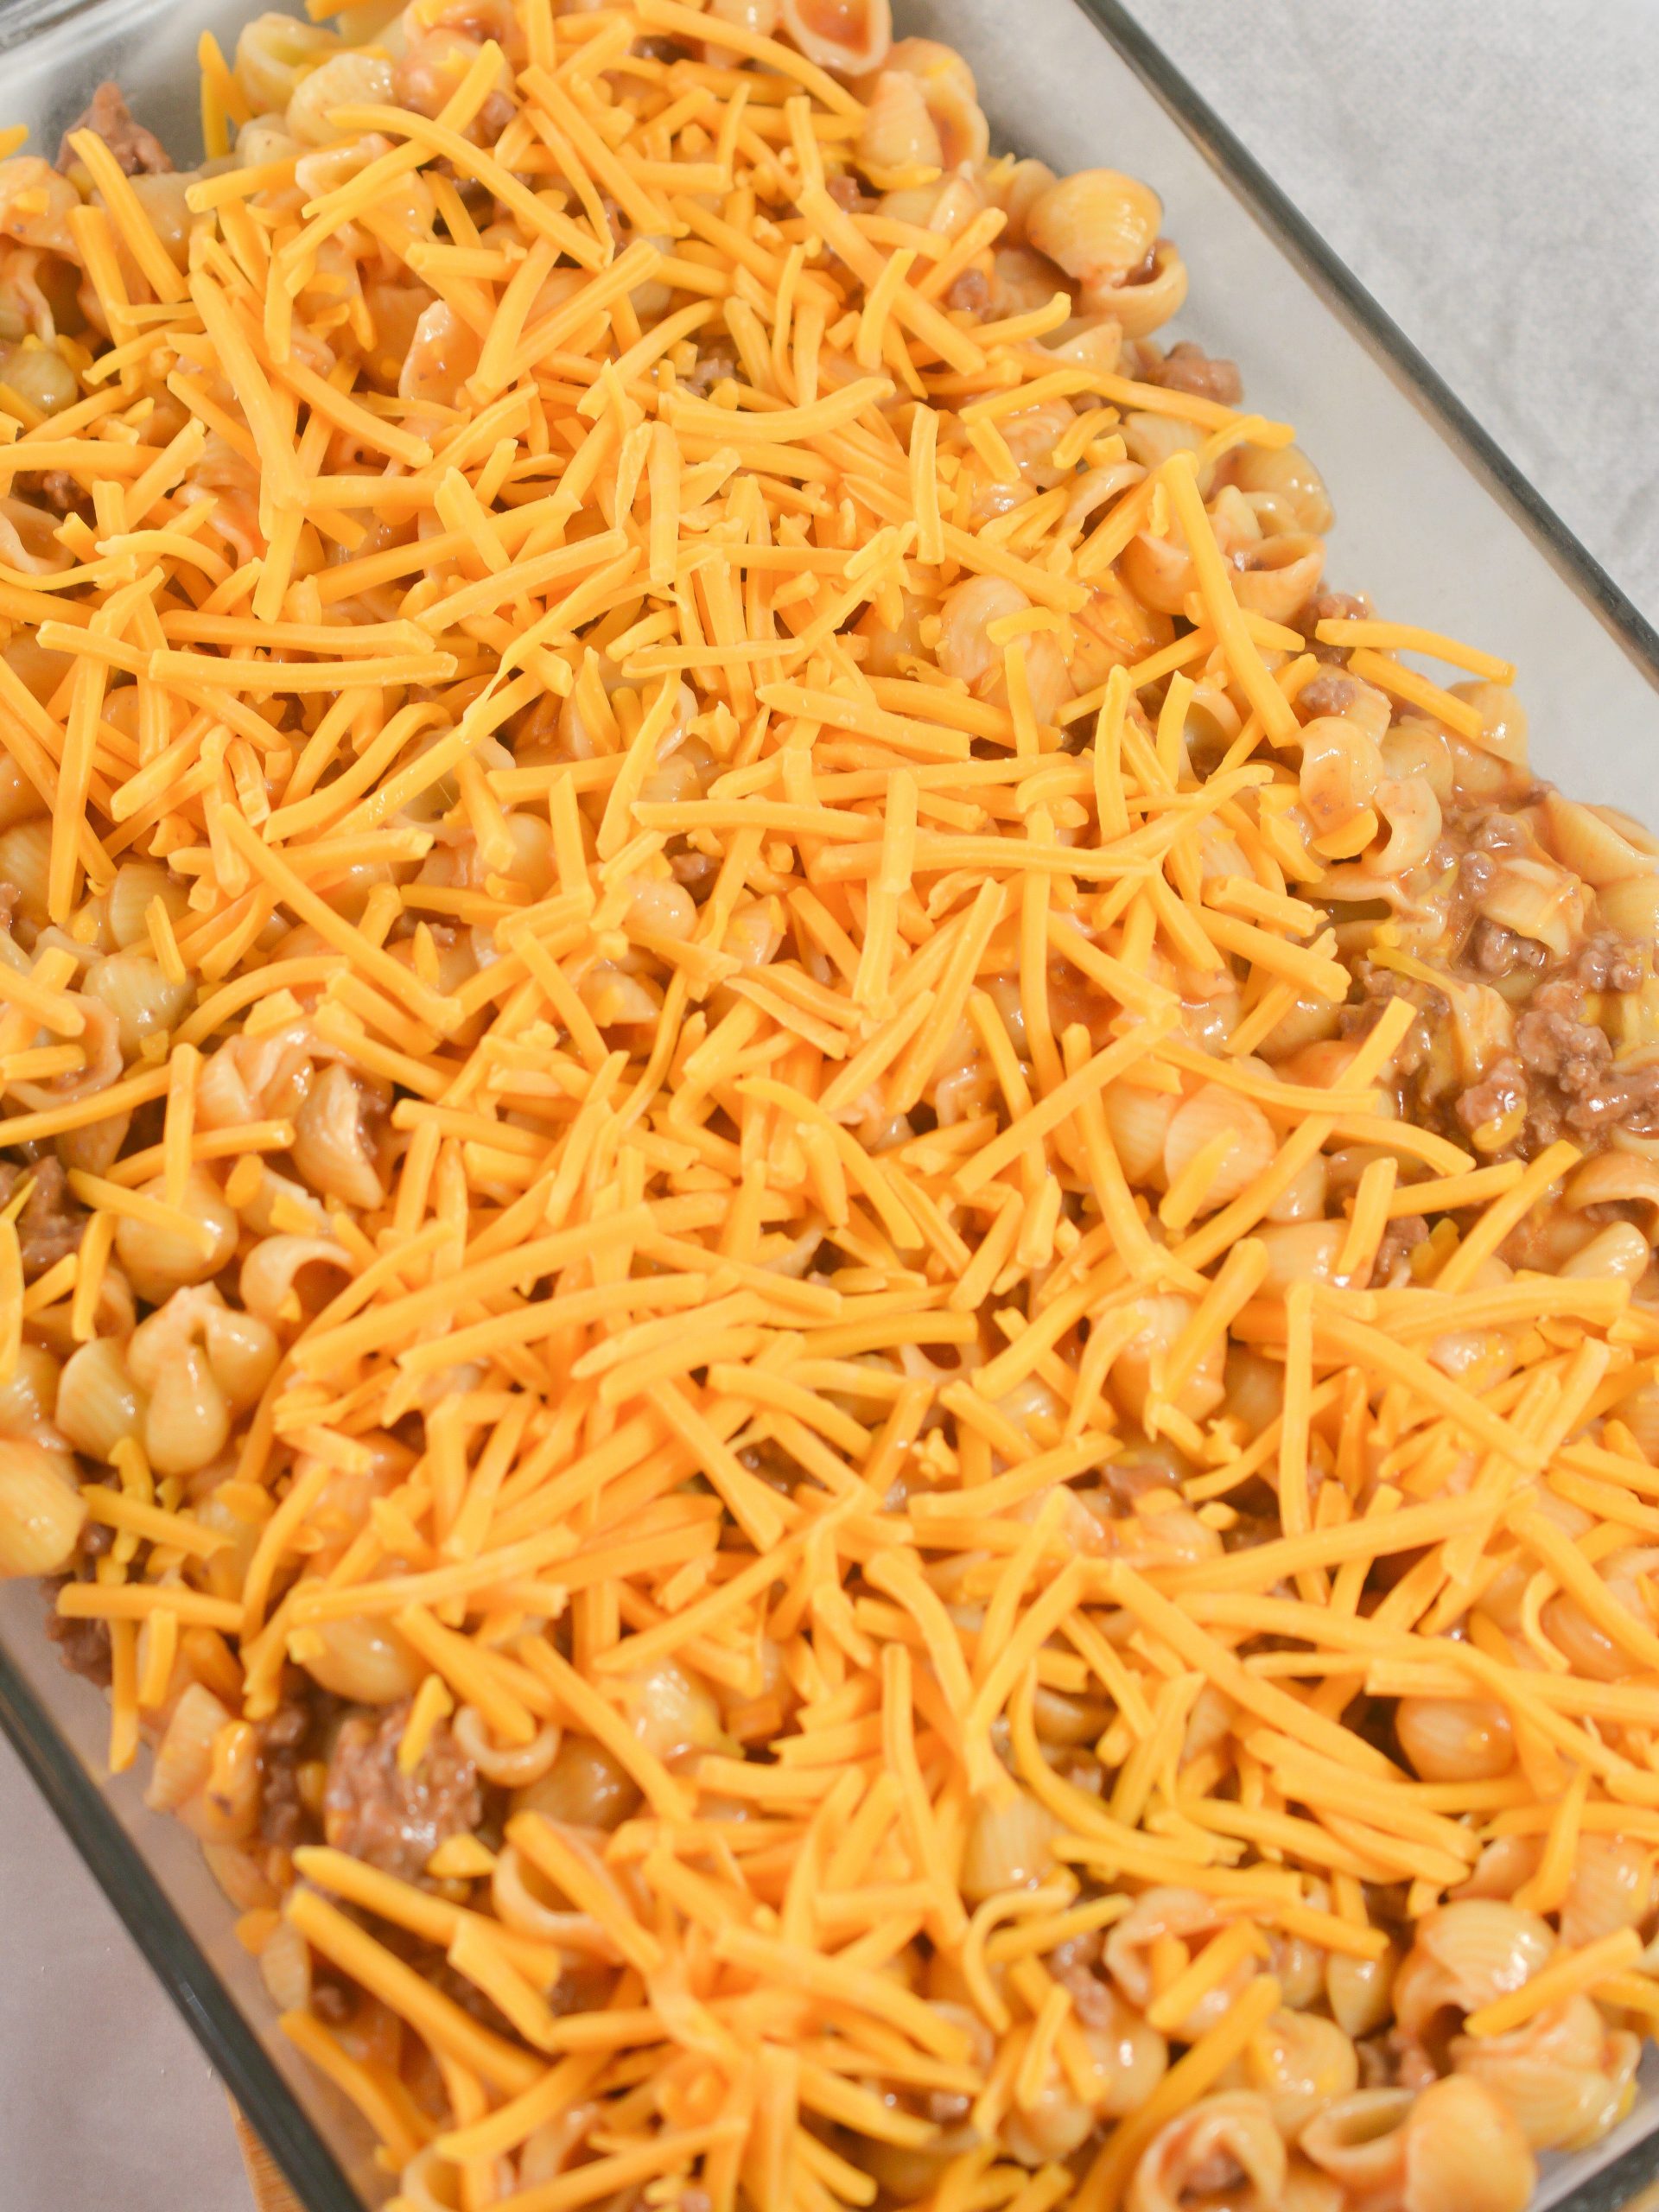 Sprinkle with the remaining cheese.  Cook covered in aluminum foil for 20 minutes.